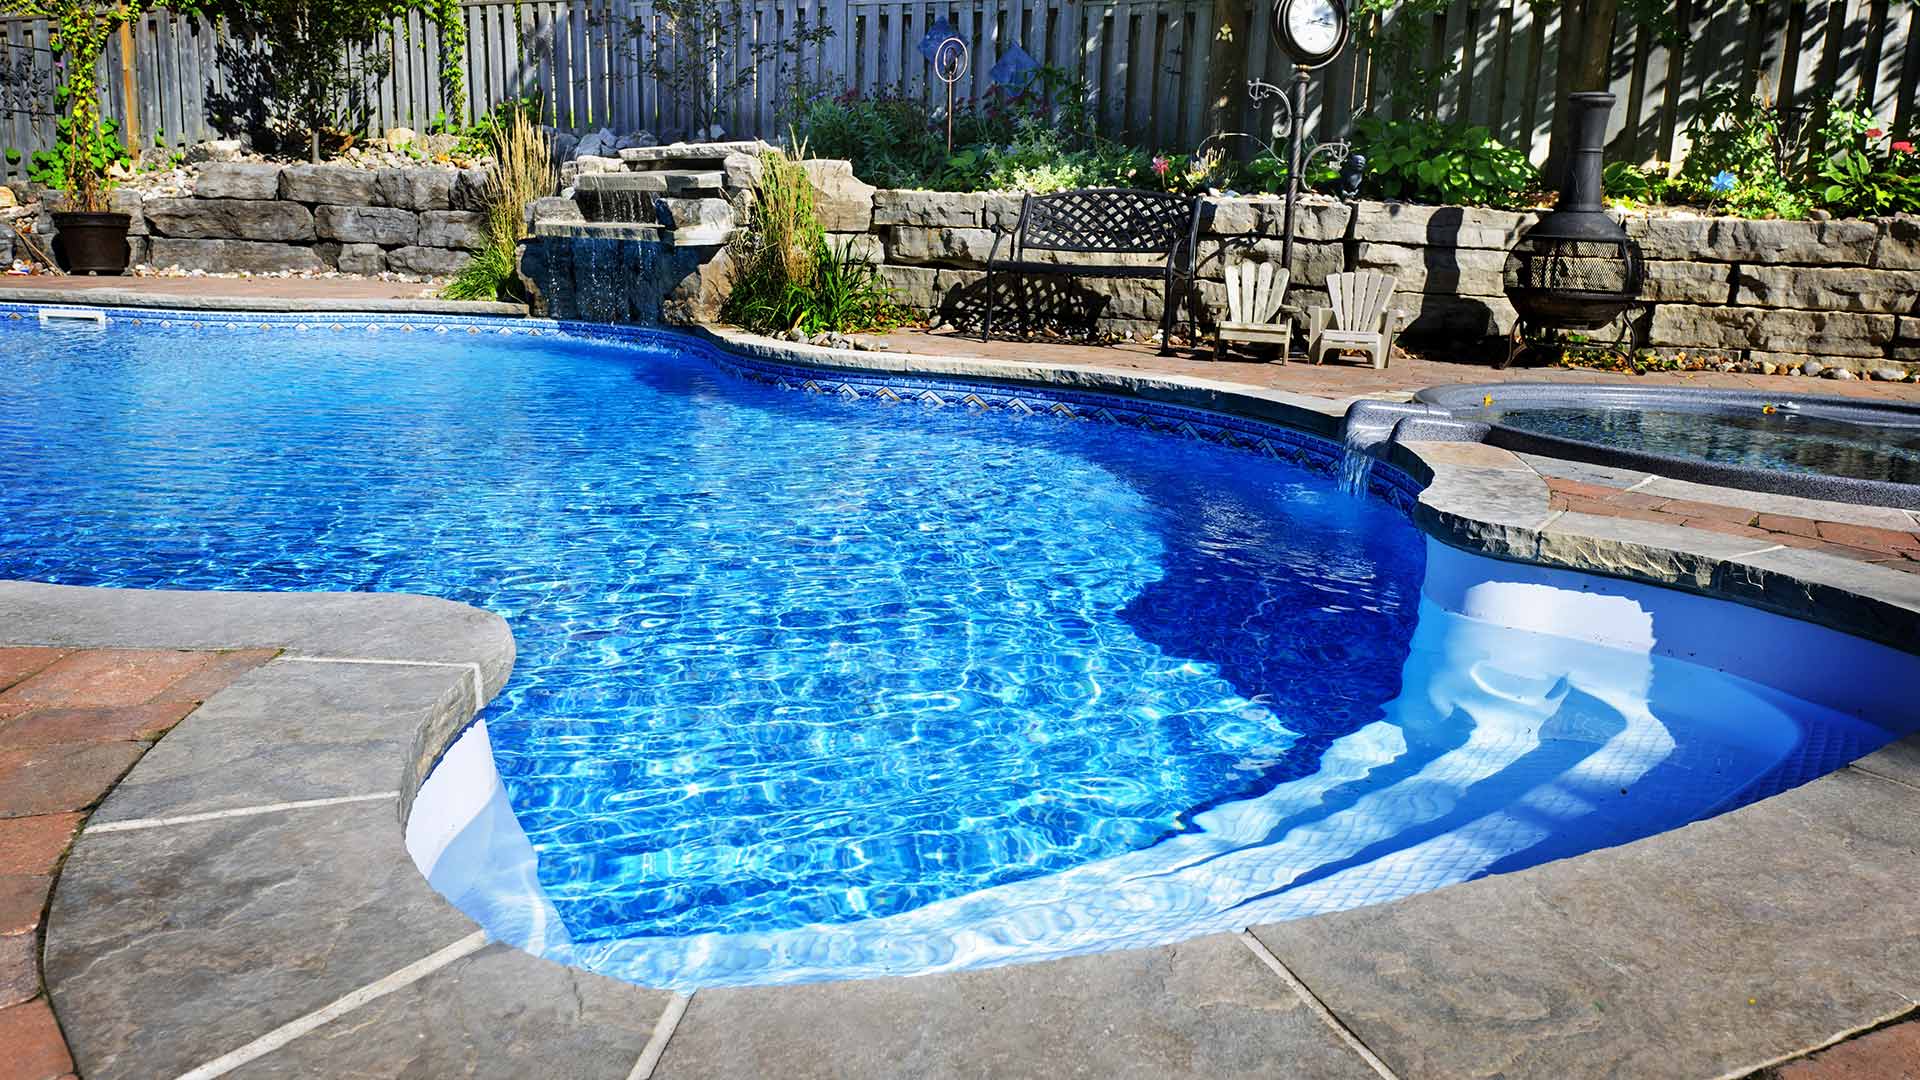 Building a New Pool? Here Are 5 Material Options to Choose From